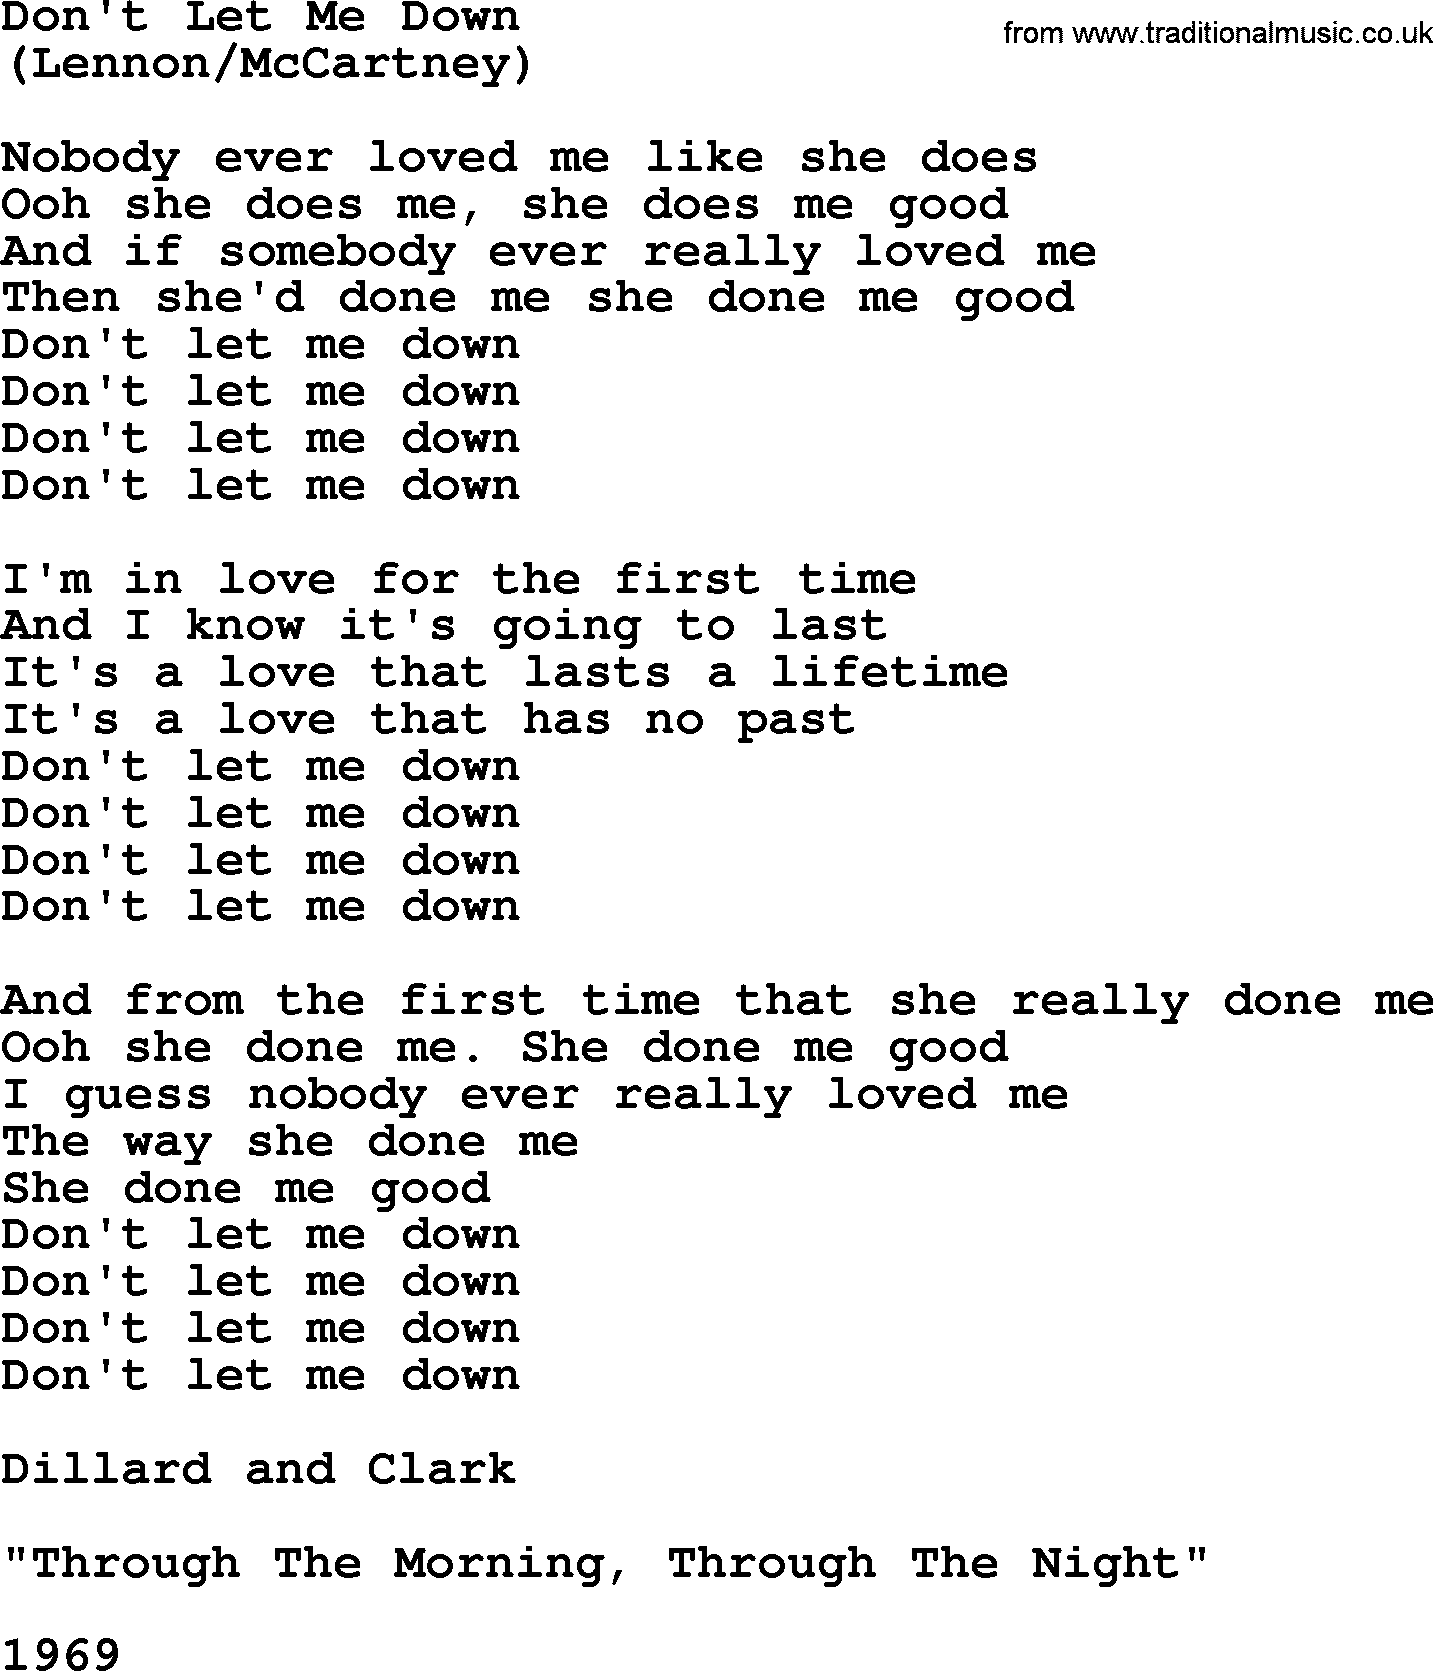 The Byrds song Don't Let Me Down, lyrics